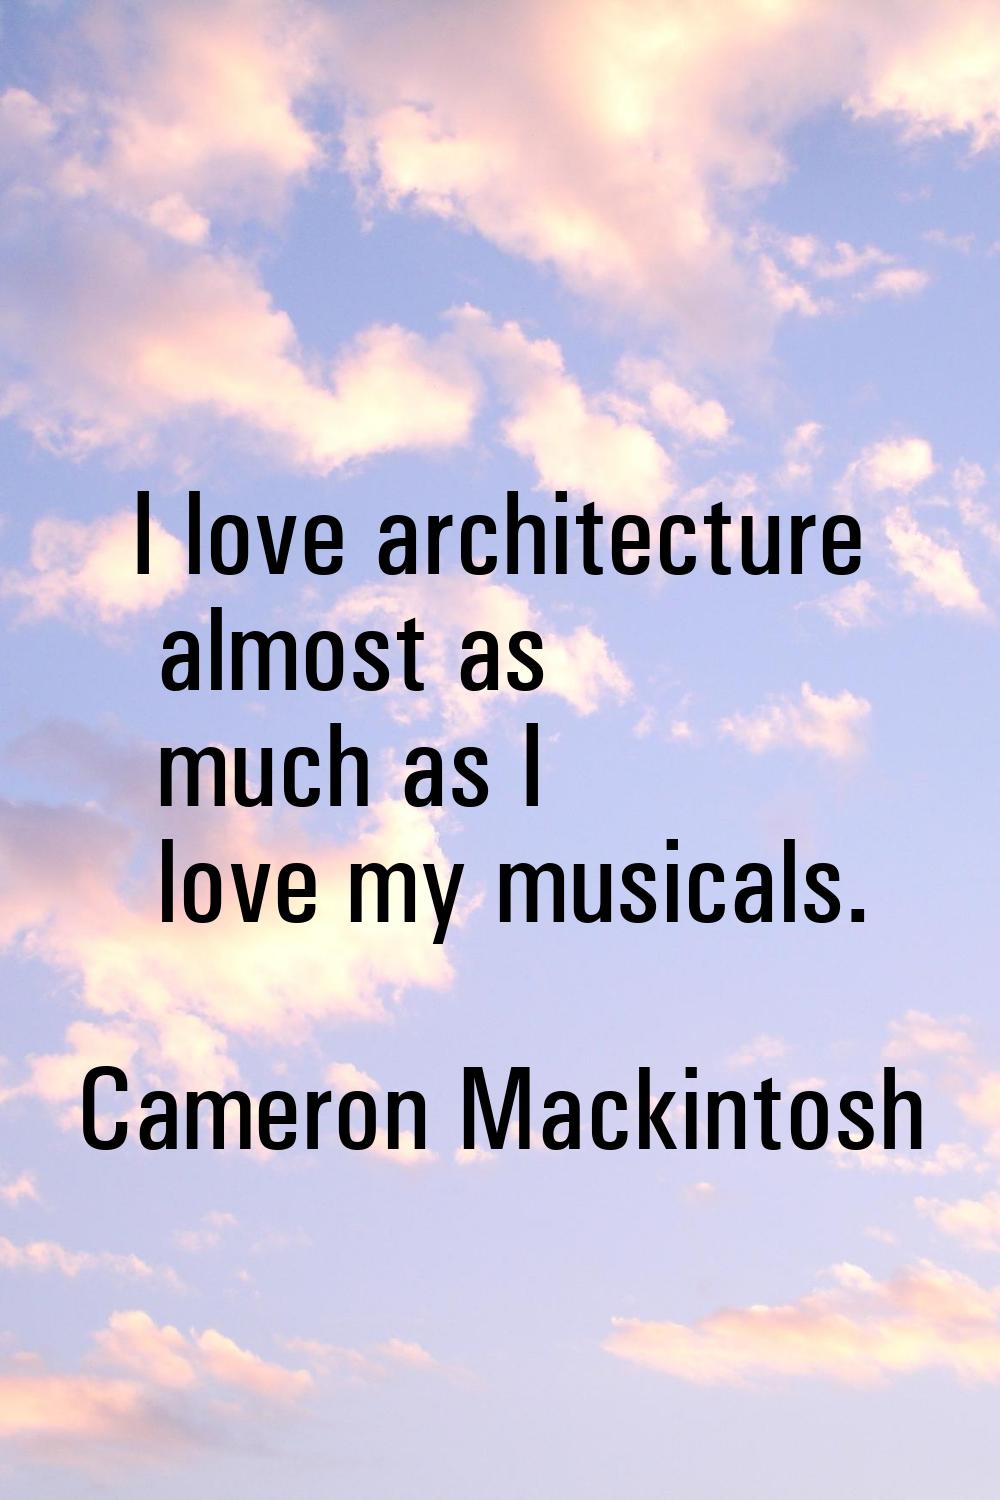 I love architecture almost as much as I love my musicals.